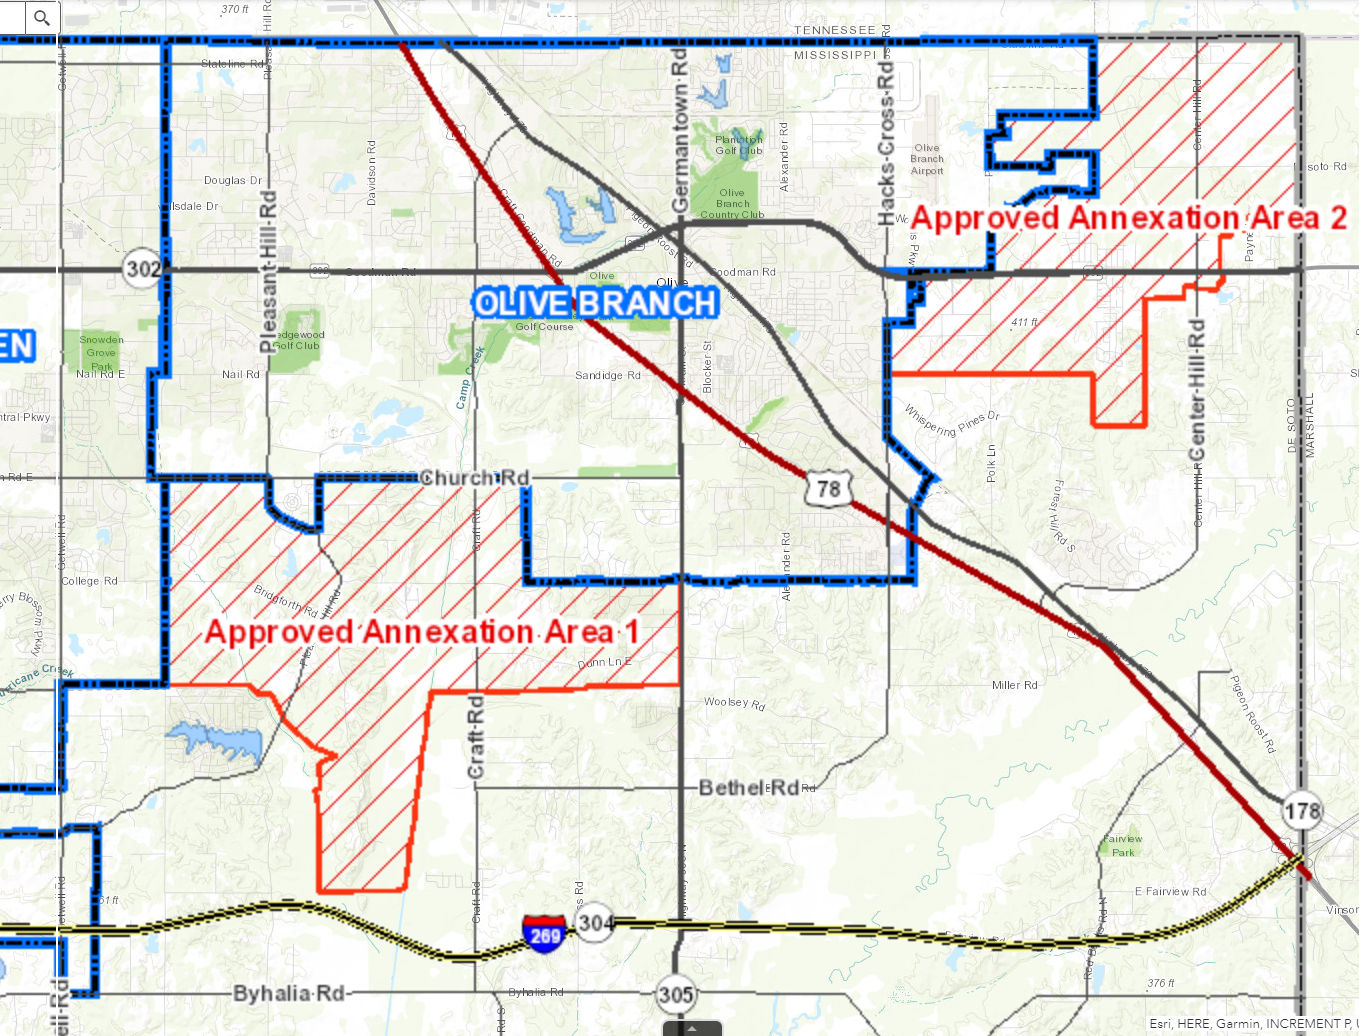 Olive Branch annexation in final process